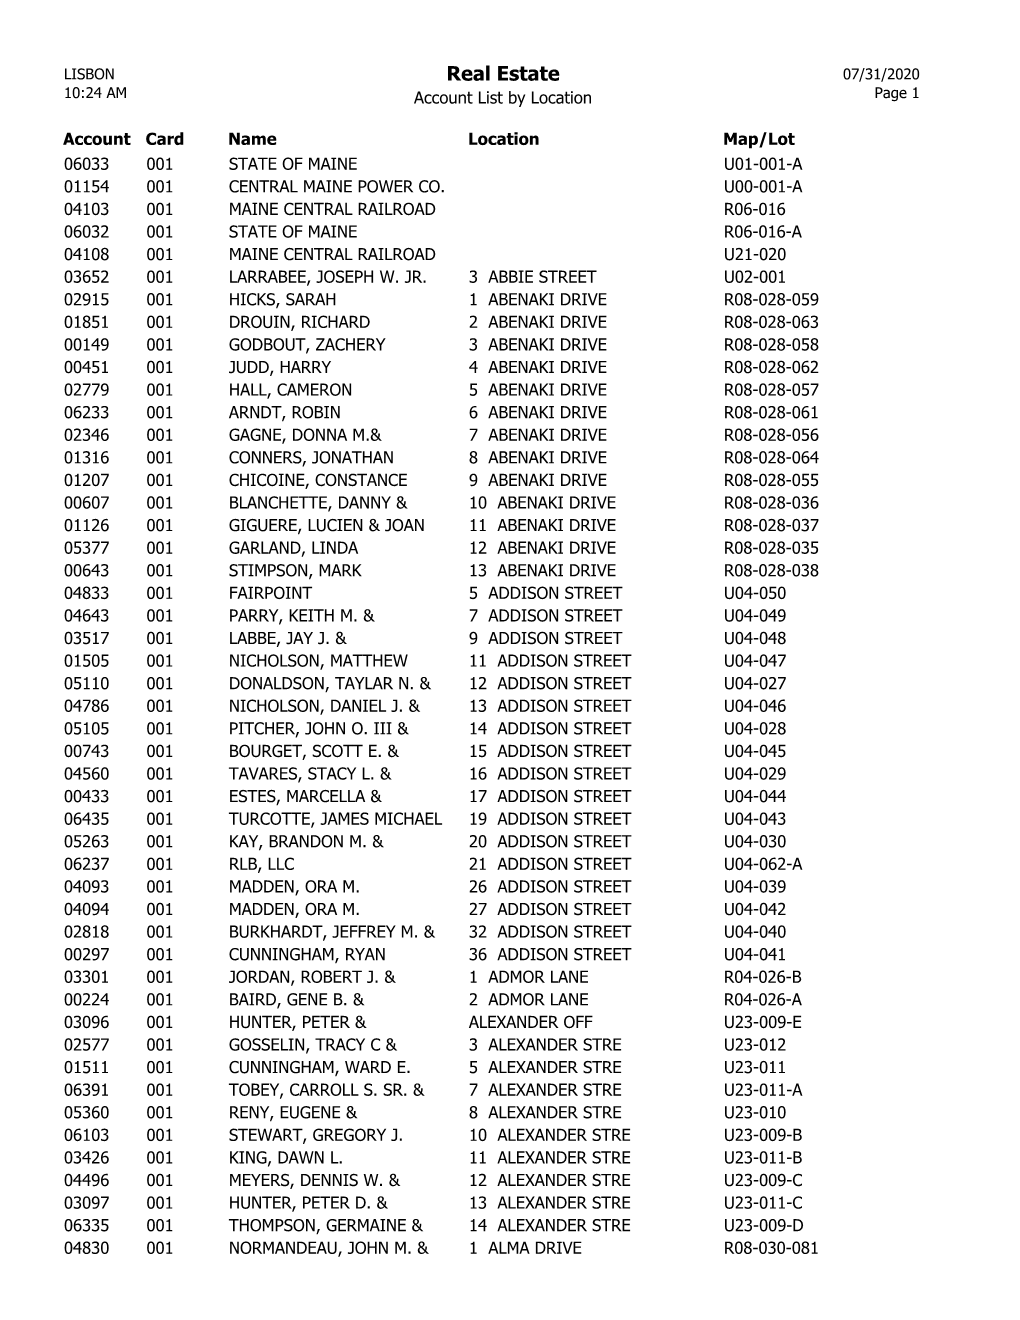 Real Estate 07/31/2020 10:24 AM Account List by Location Page 1